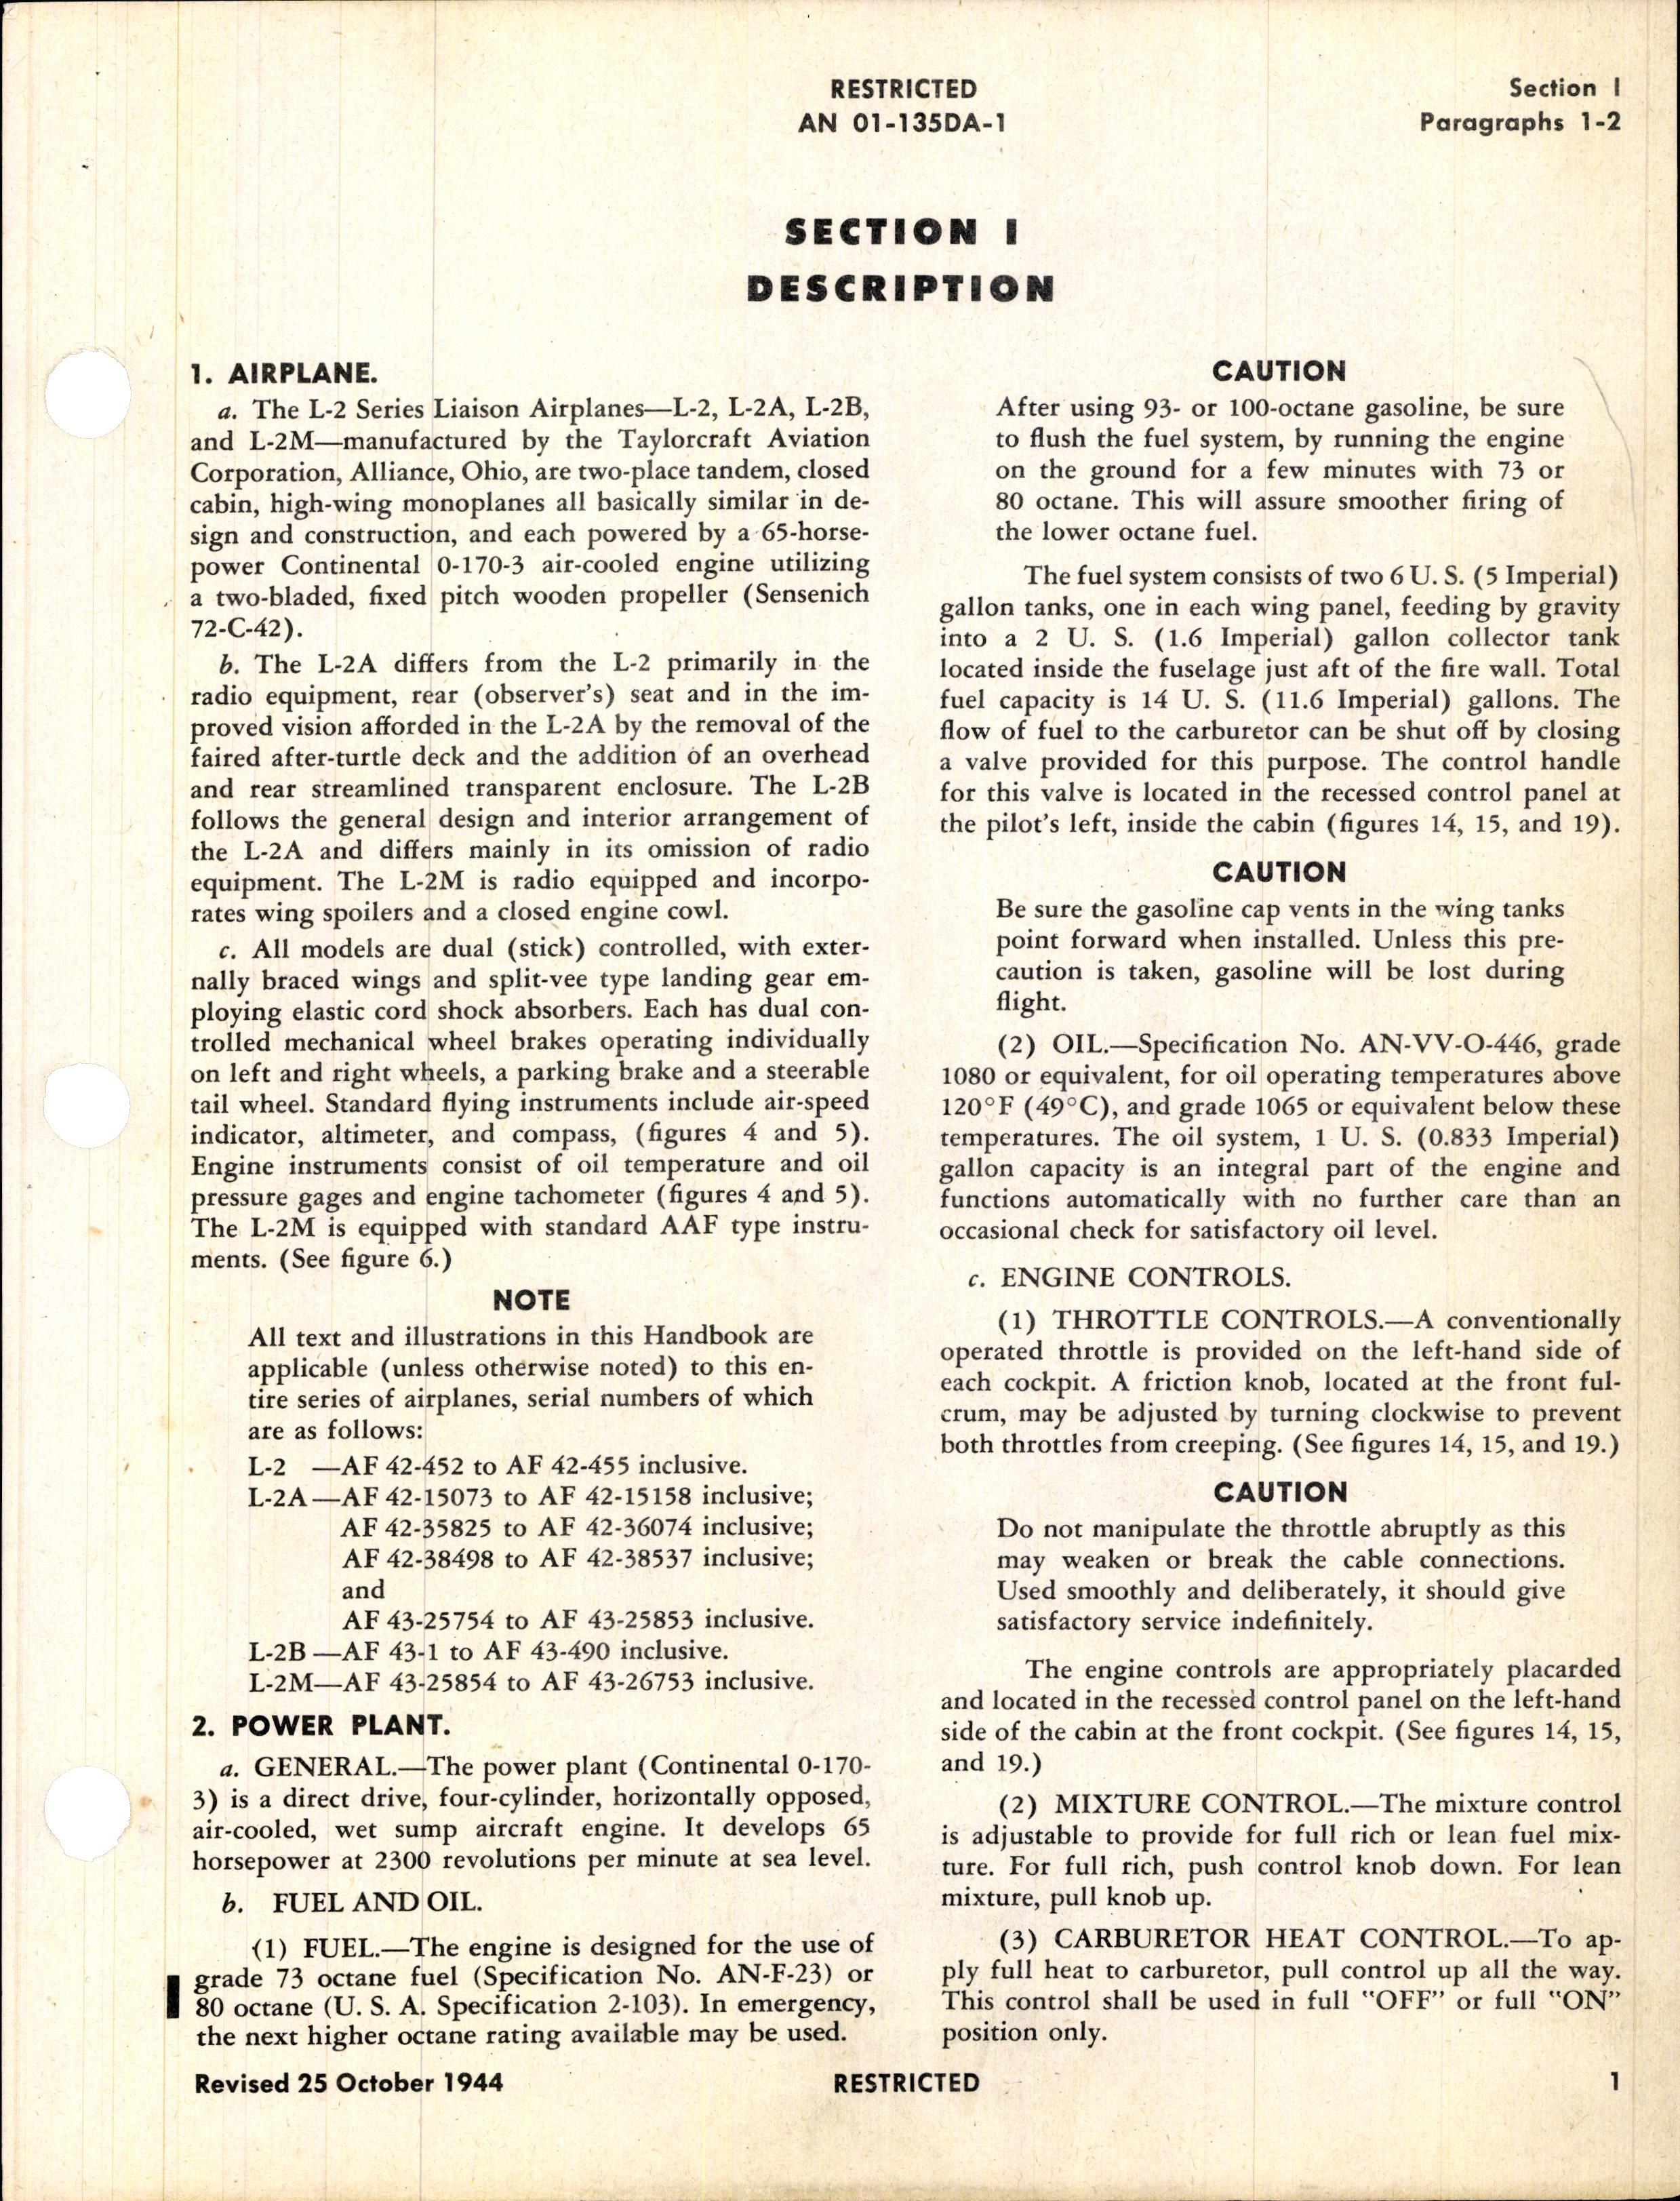 Sample page 5 from AirCorps Library document: Pilot's Flight Operating Instructions for L-2, L-2A, L-2B, and L-2M Airplanes